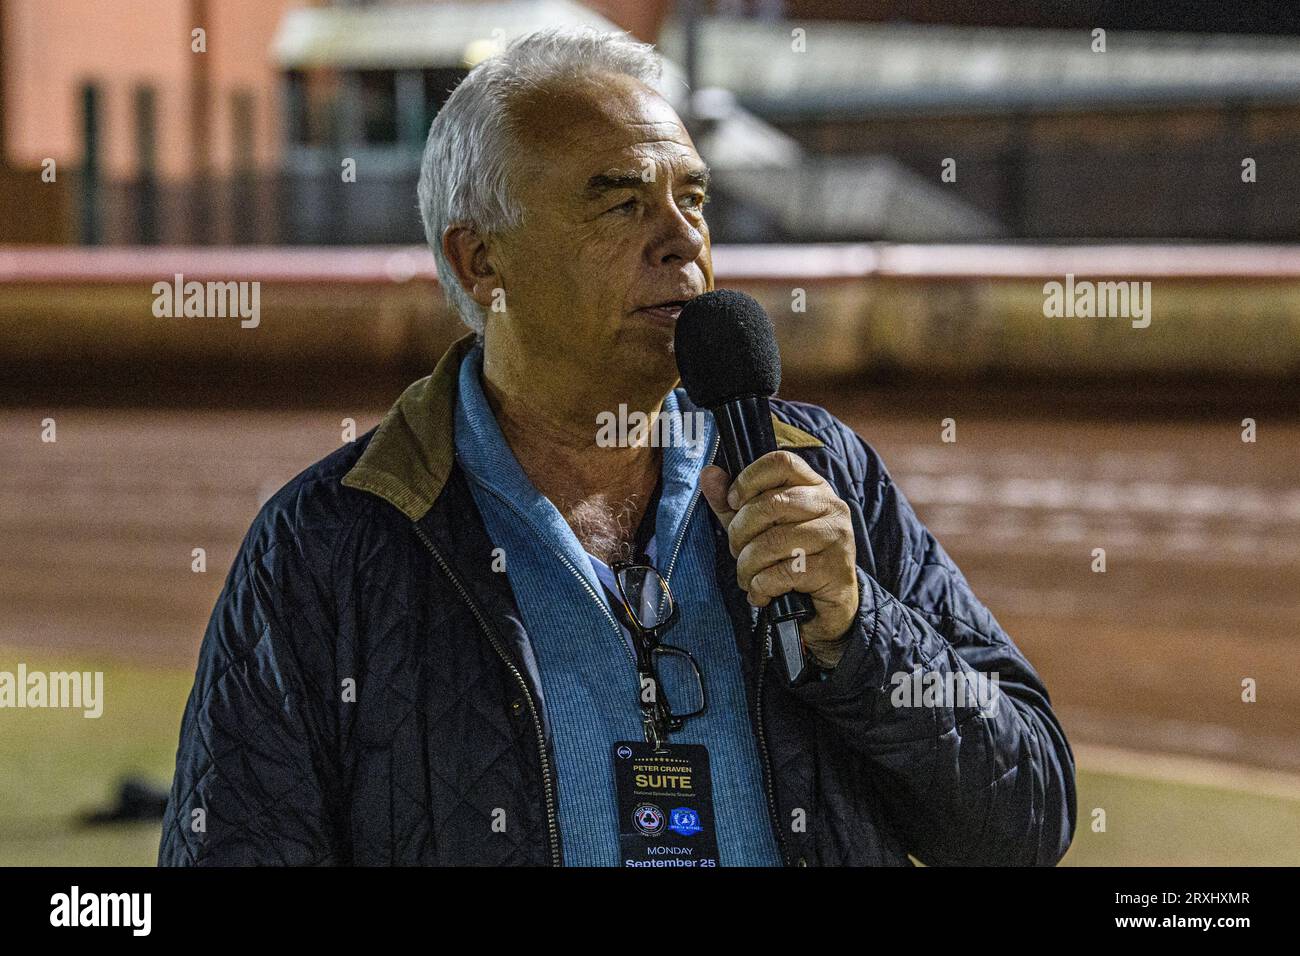 Manchester, UK. 25th September 2023Belle Vue joint owner Robin Southwell thanks the crowd for their support during the Sports Insure Premiership Semi Final Playoff 2nd leg match between Belle Vue Aces and Ipswich Witches at the National Speedway Stadium, Manchester on Monday 25th September 2023. (Photo: Ian Charles | MI News) Credit: MI News & Sport /Alamy Live News Stock Photo